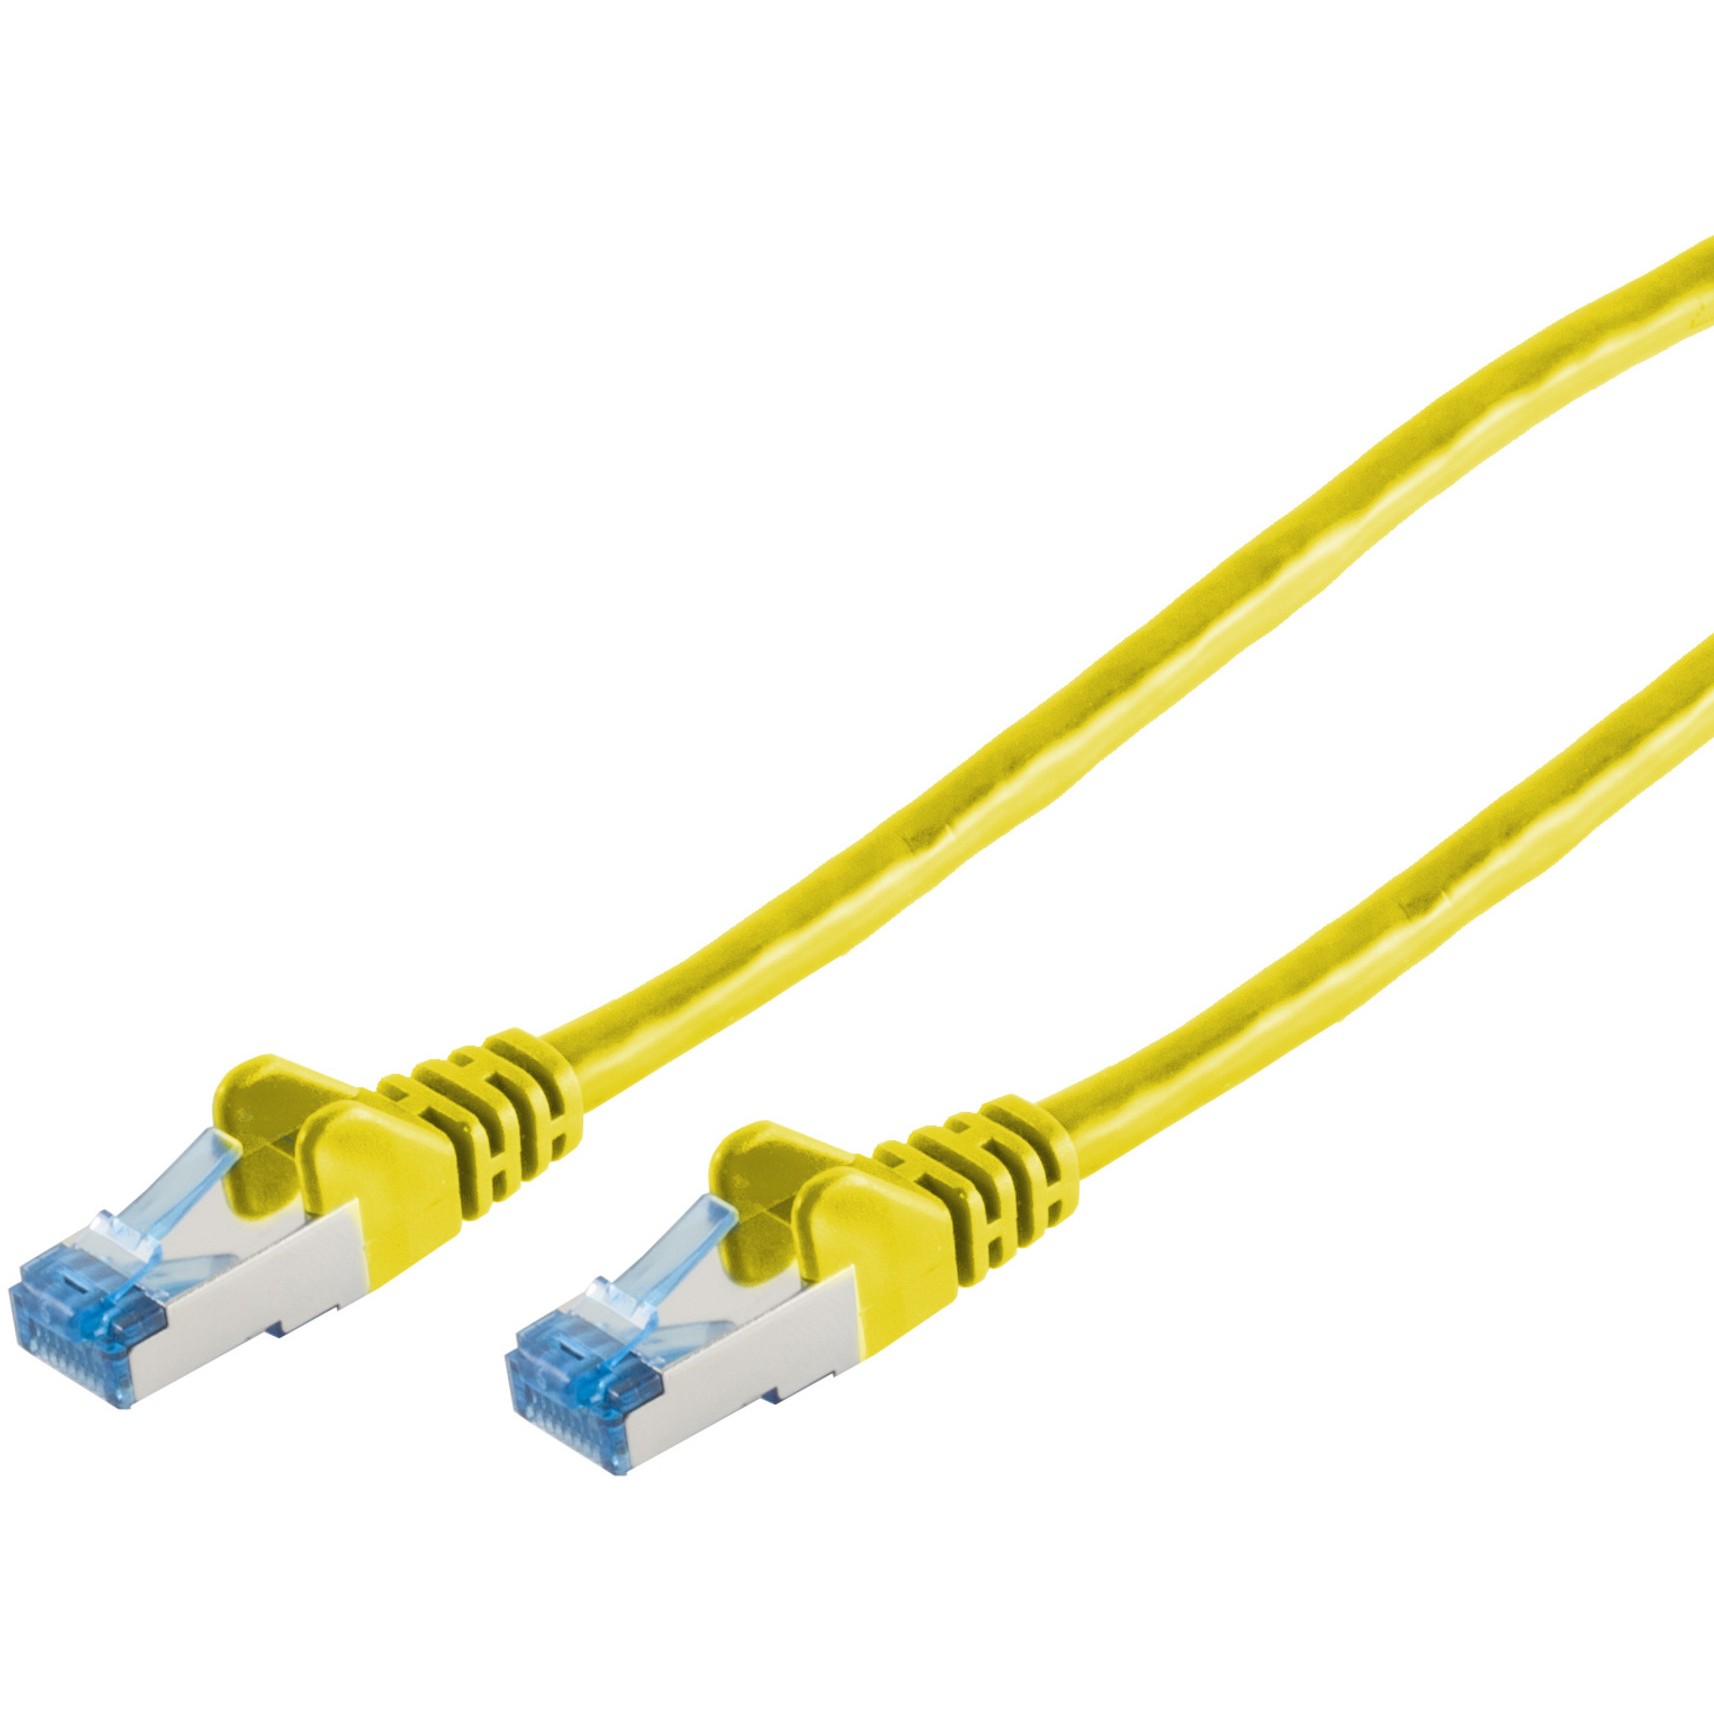 S-Conn 75711-Y networking cable